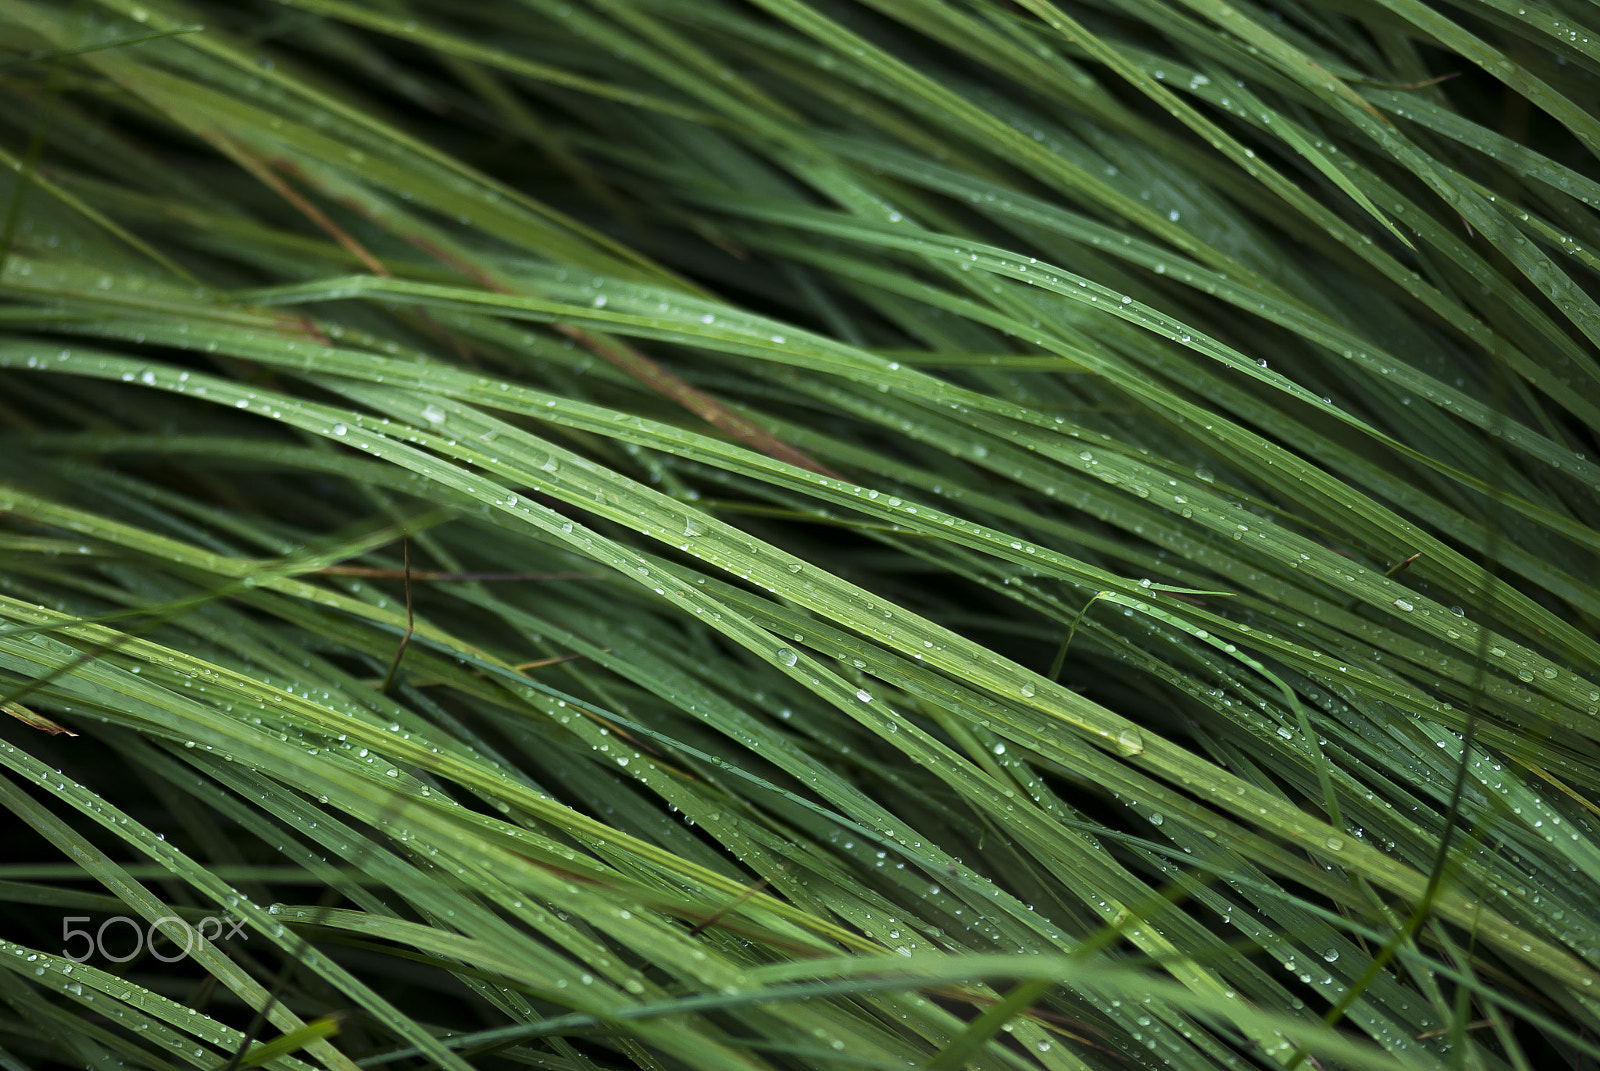 Nikon D60 + Nikon AF-S Micro-Nikkor 105mm F2.8G IF-ED VR sample photo. Dew covered grass photography